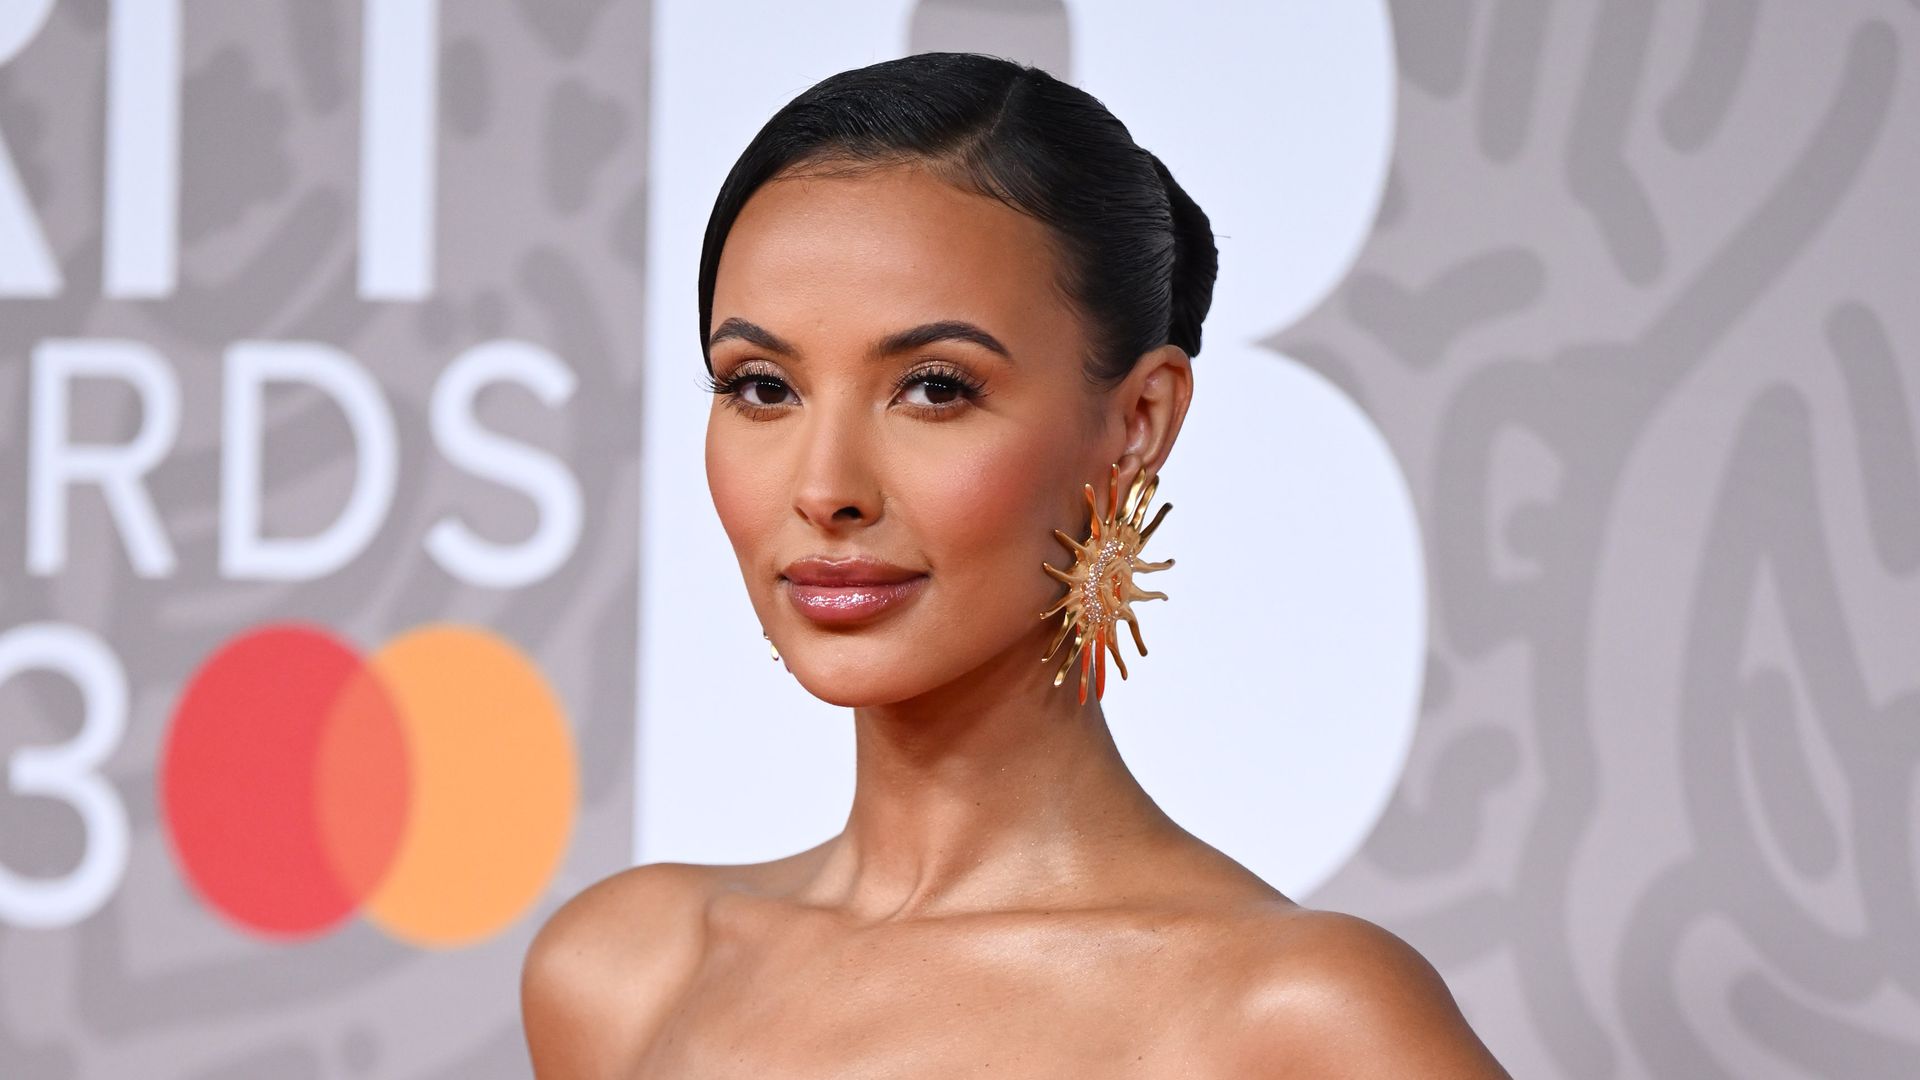 Inside Maya Jama's love life: everything you need to know about star's dating history